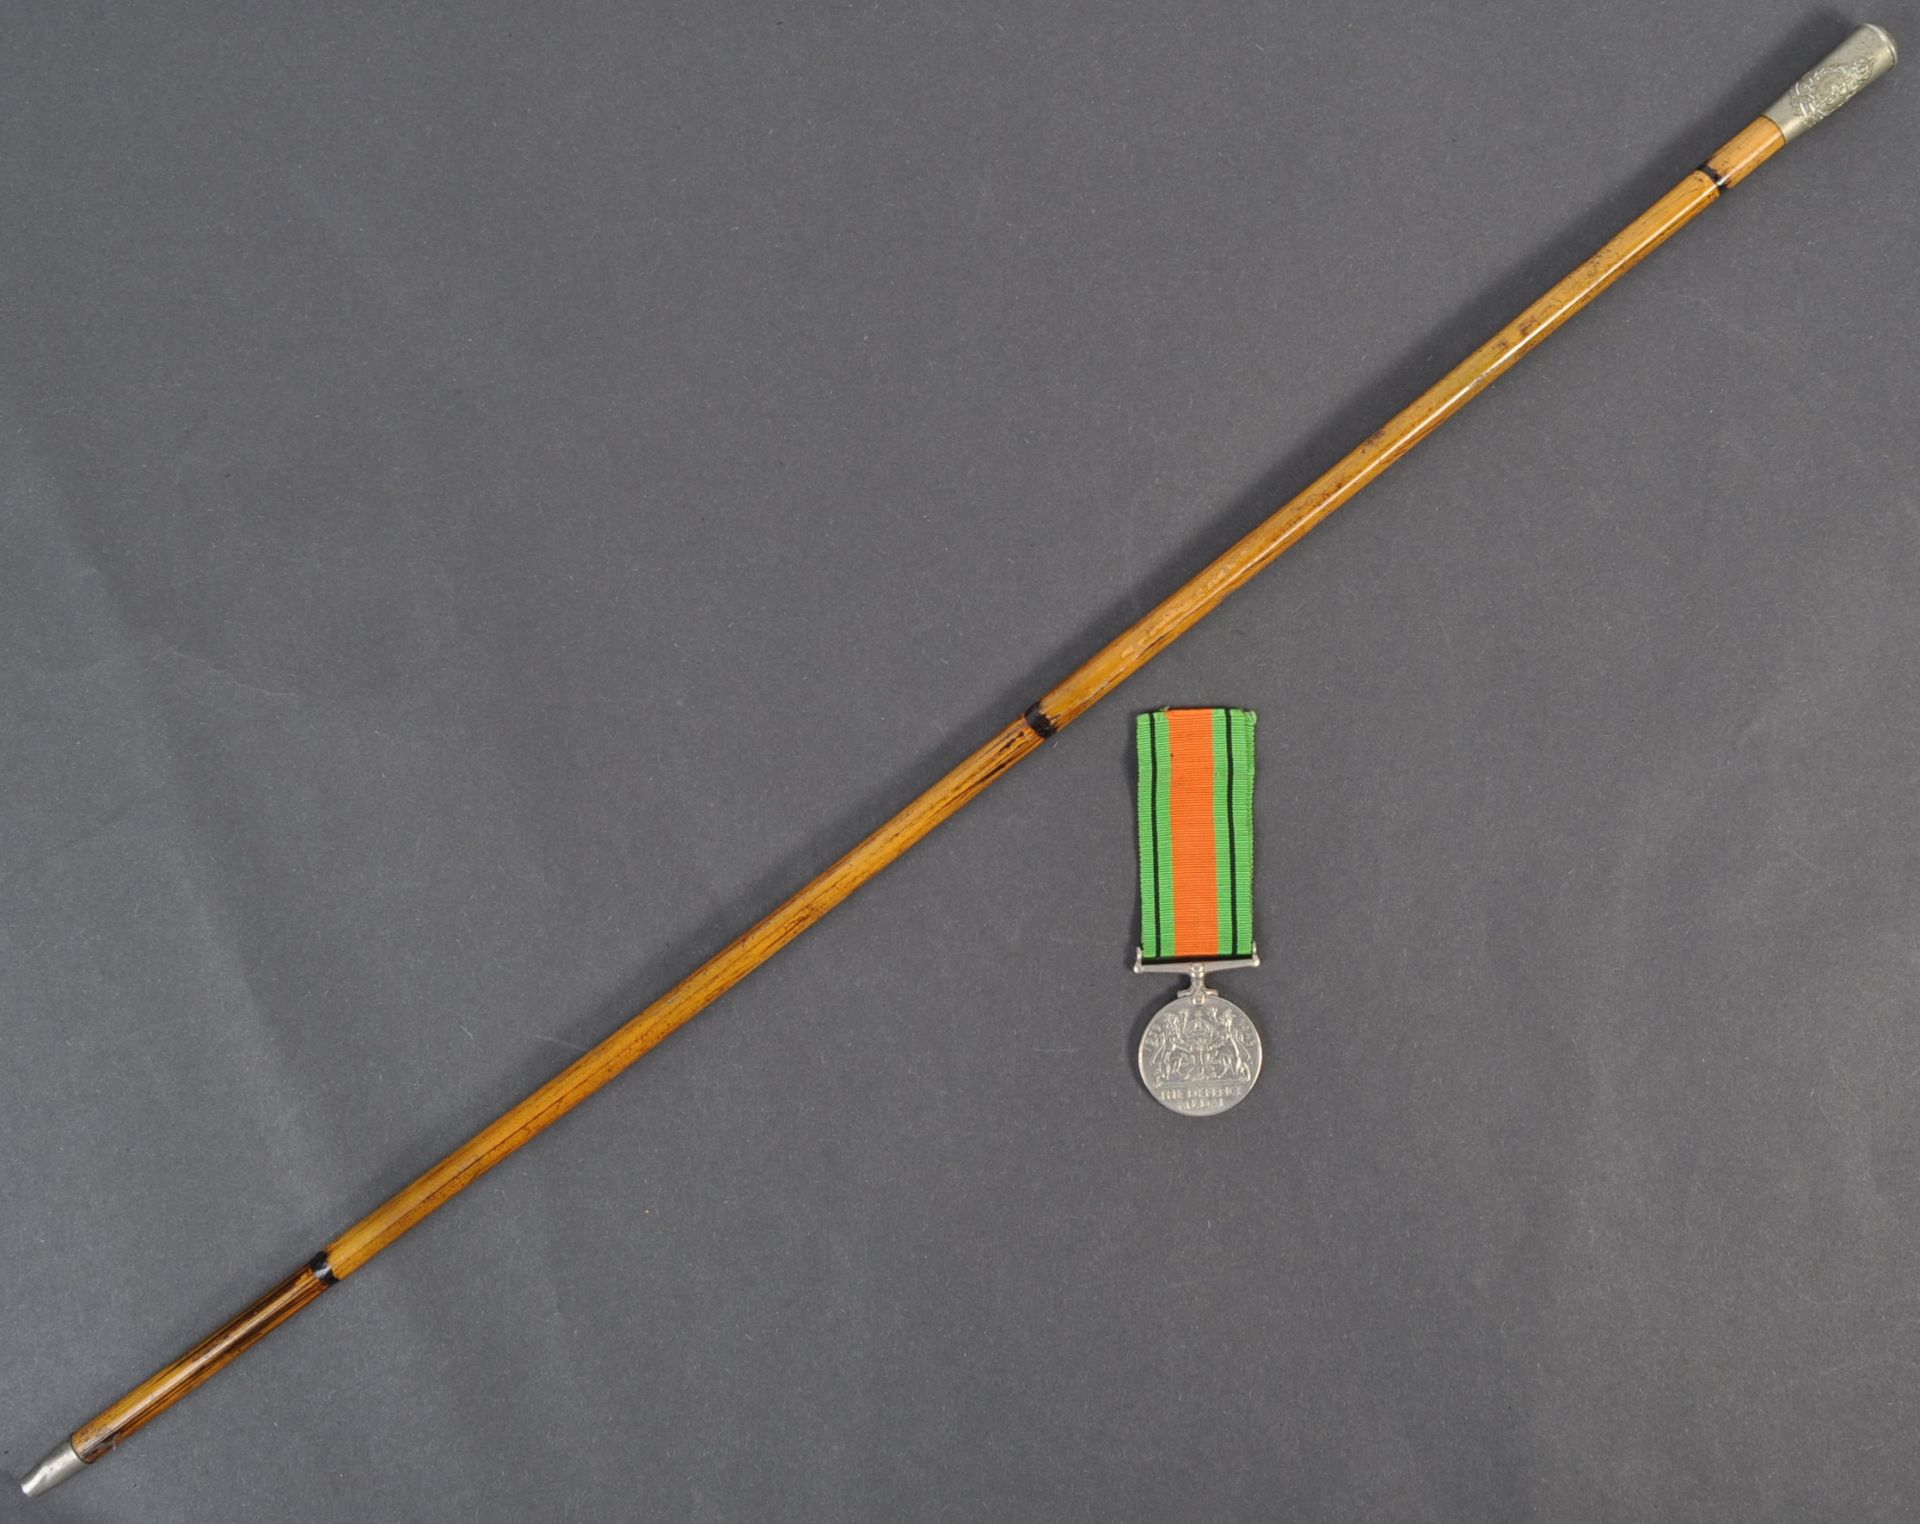 WWII DEFENCE MEDAL & ROYAL ARMY MEDICAL CORPS SWAGGER STICK